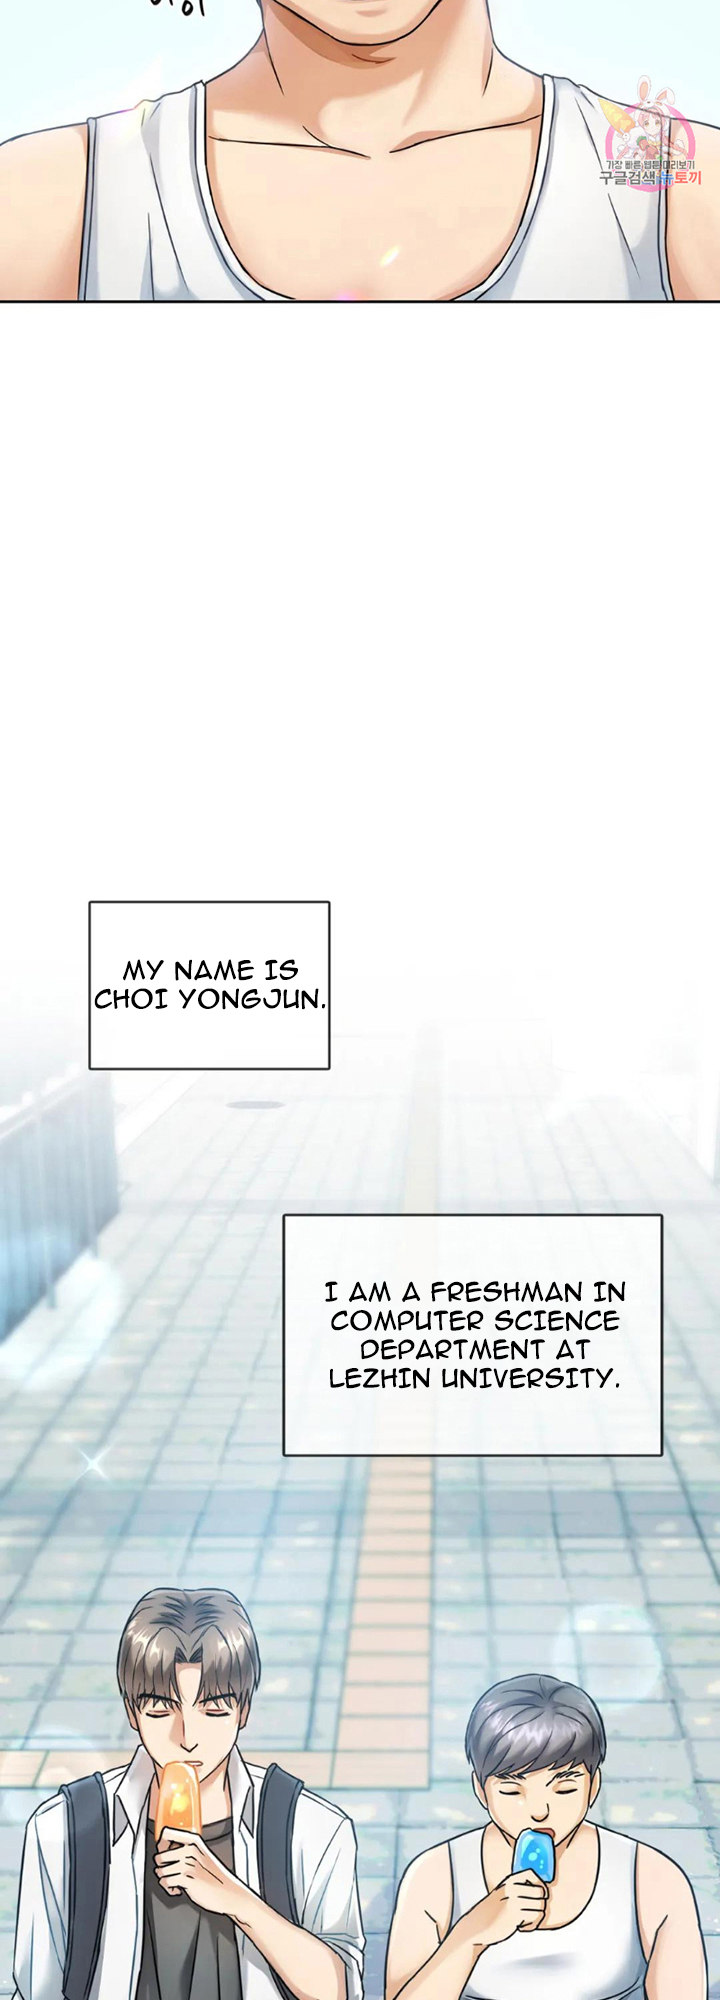 I Can’t Stand It, Ajumma - Chapter 1 Page 3